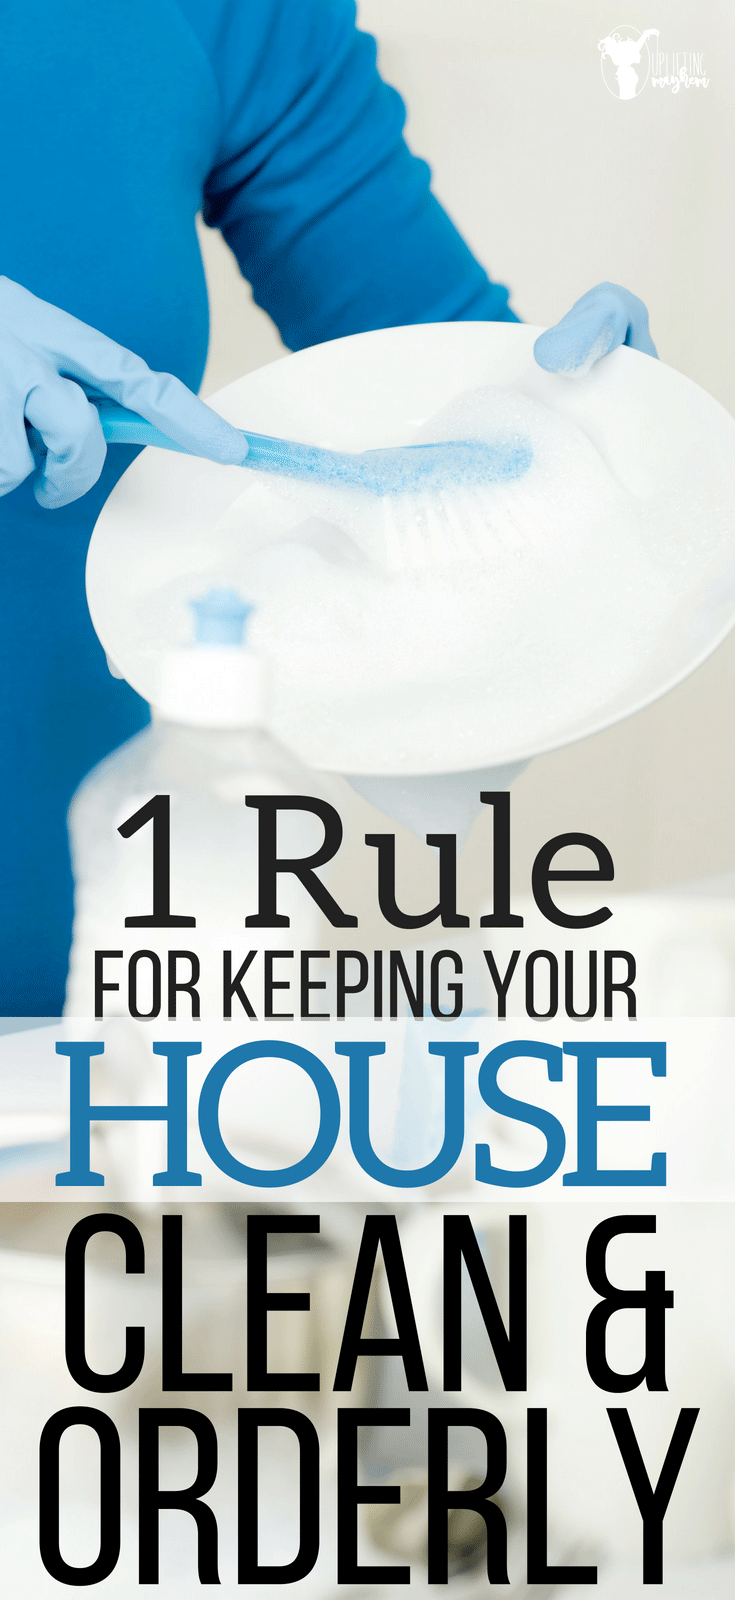 1 rule for keeping your house clean and orderly